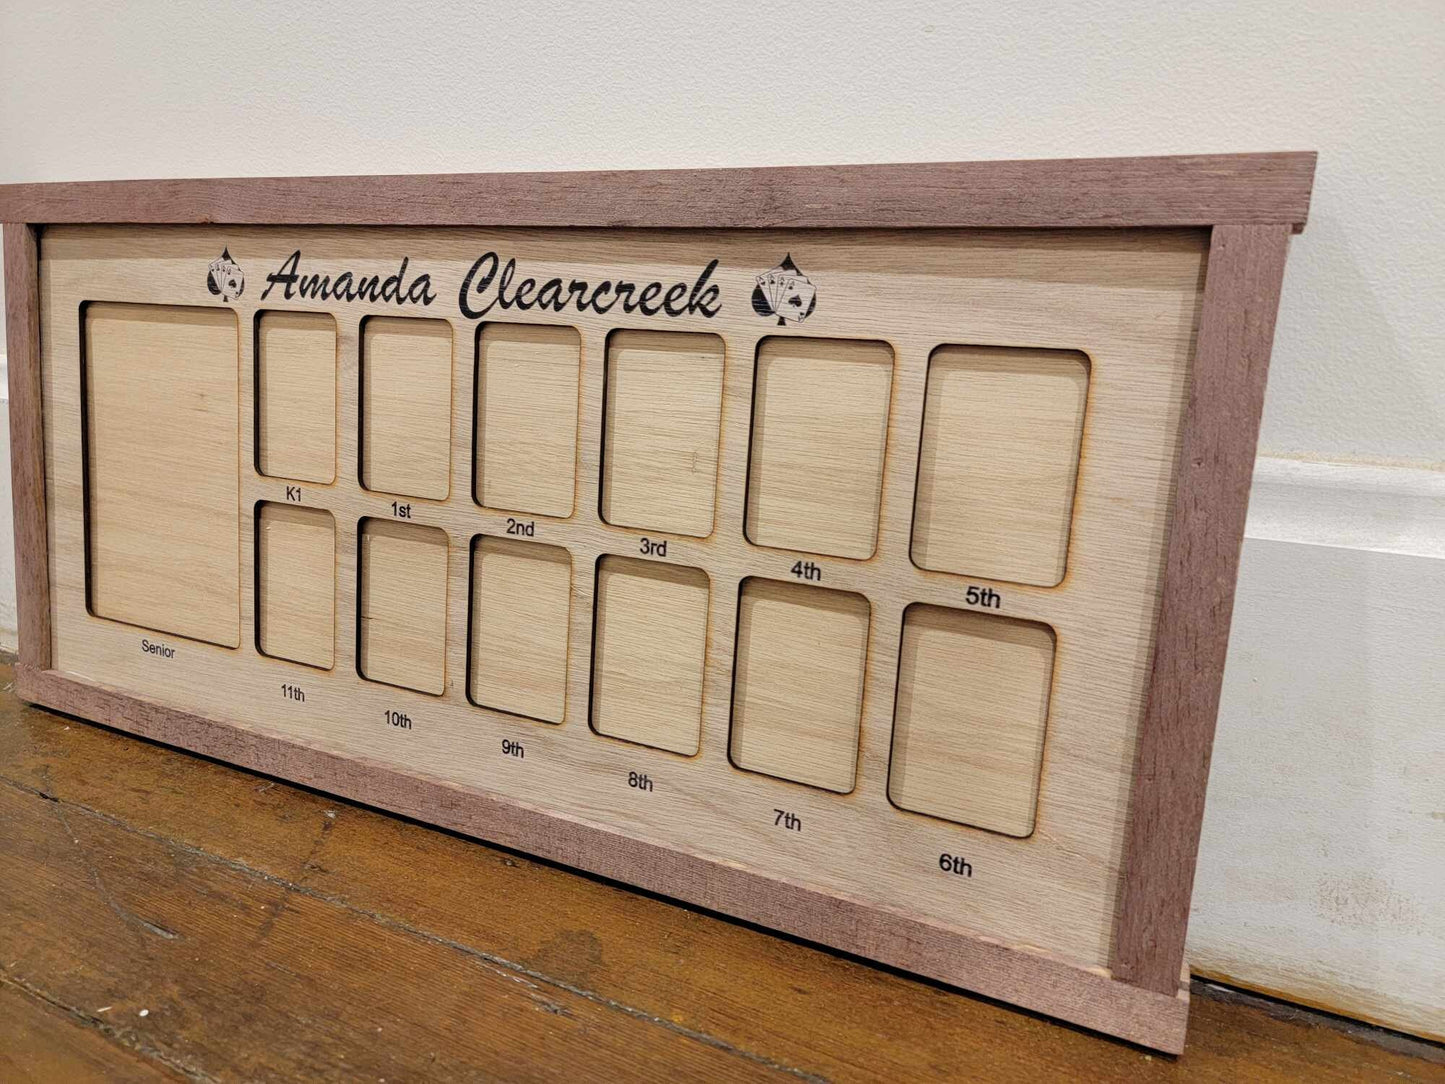 Amanda Clearcreek Spades School Name Local School District Personalized K-12 Years Horizontal Picture Frame Photo Display Back to School